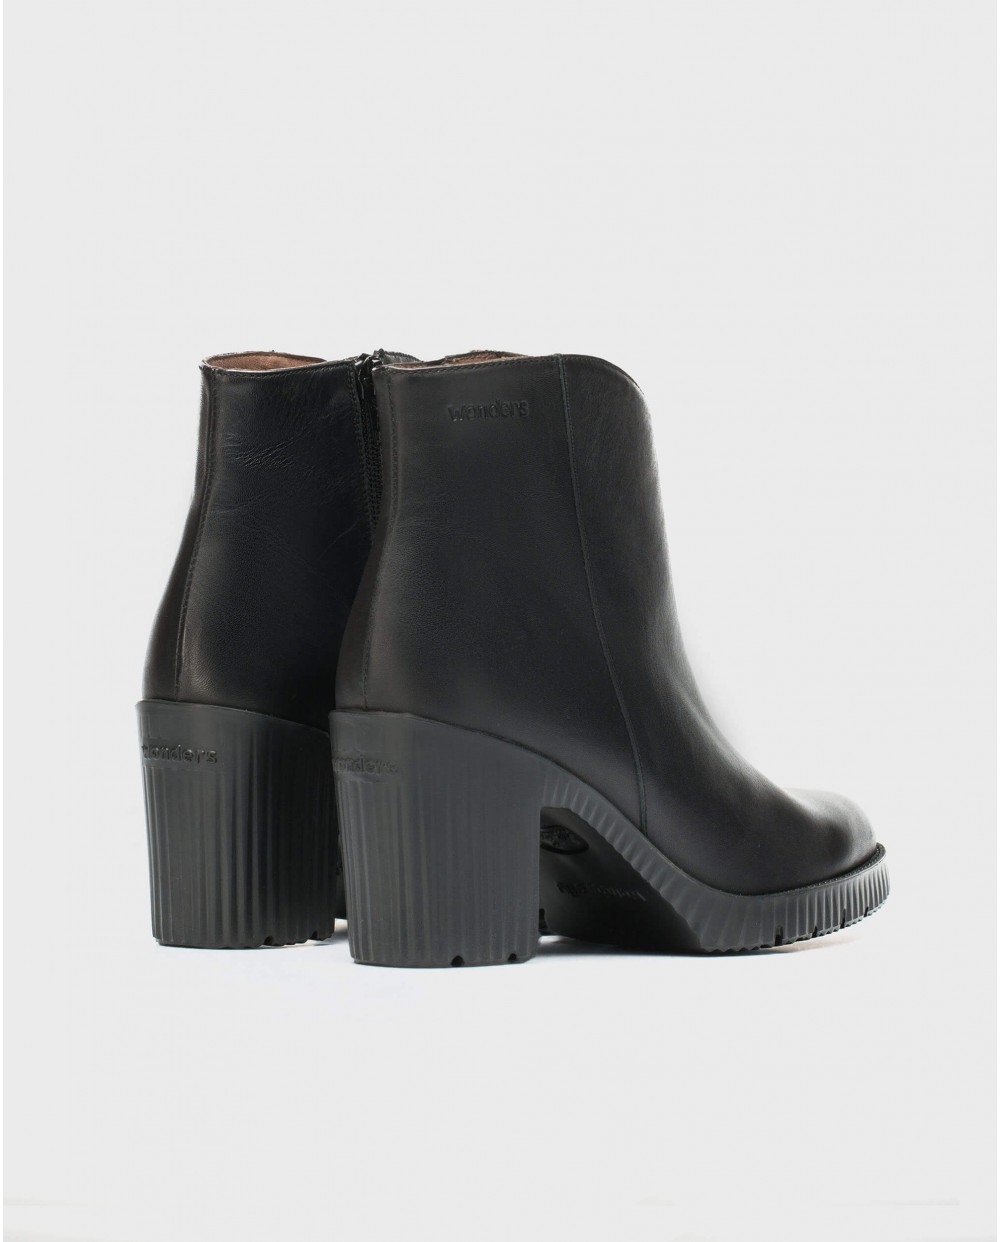 Wonders-Ankle Boots-Soft platform ankle boot